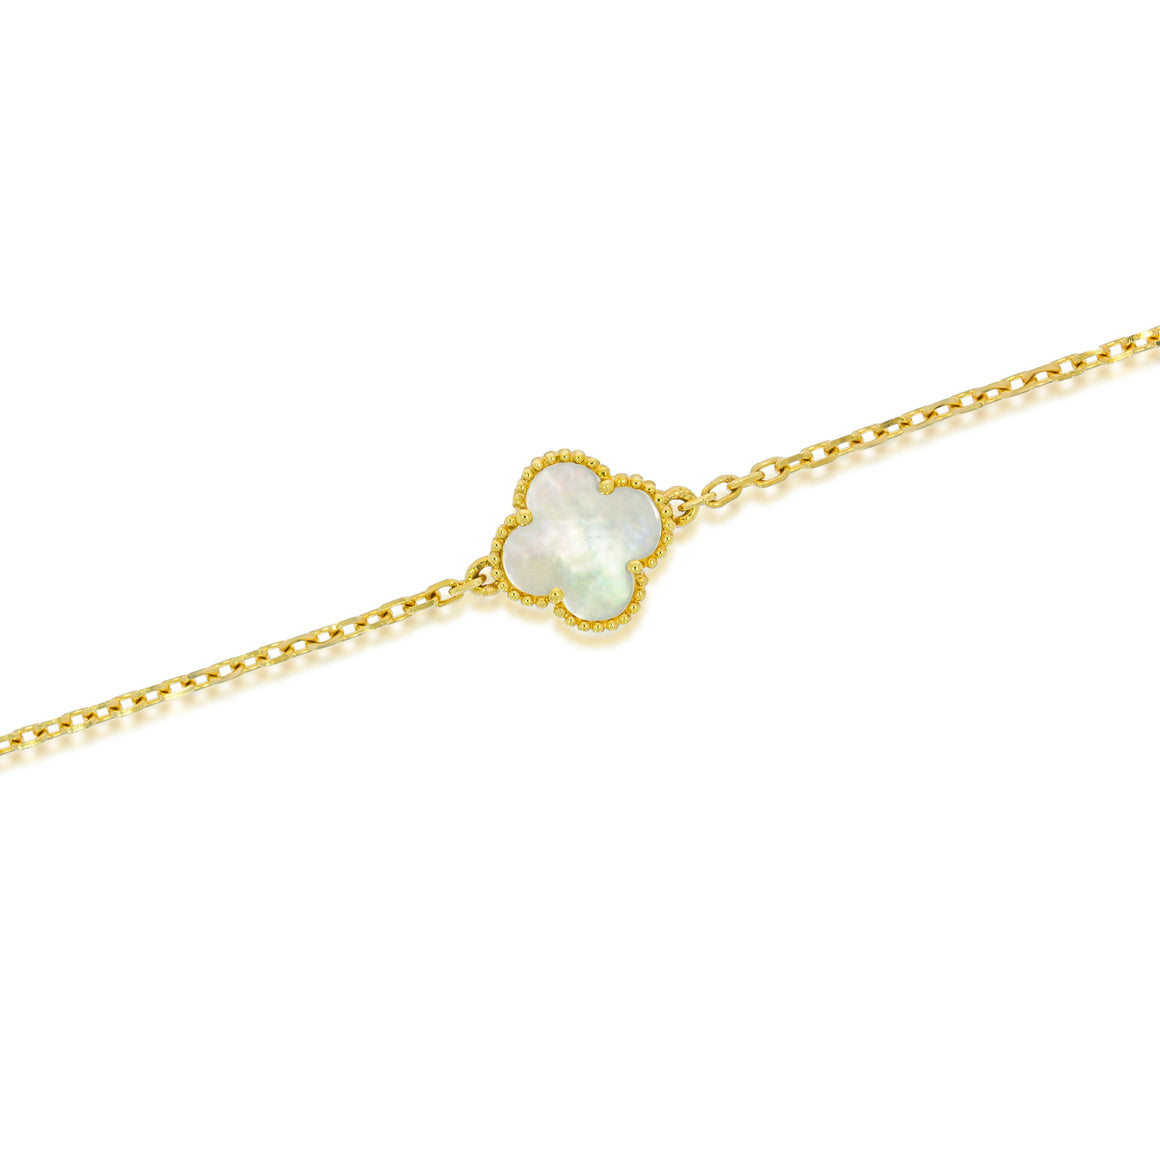 Mother of pearl Clover bracelet, 18k gold, 8.8mm diameter, gold balls Surrounding the Mother pearl all around, timeless setting.